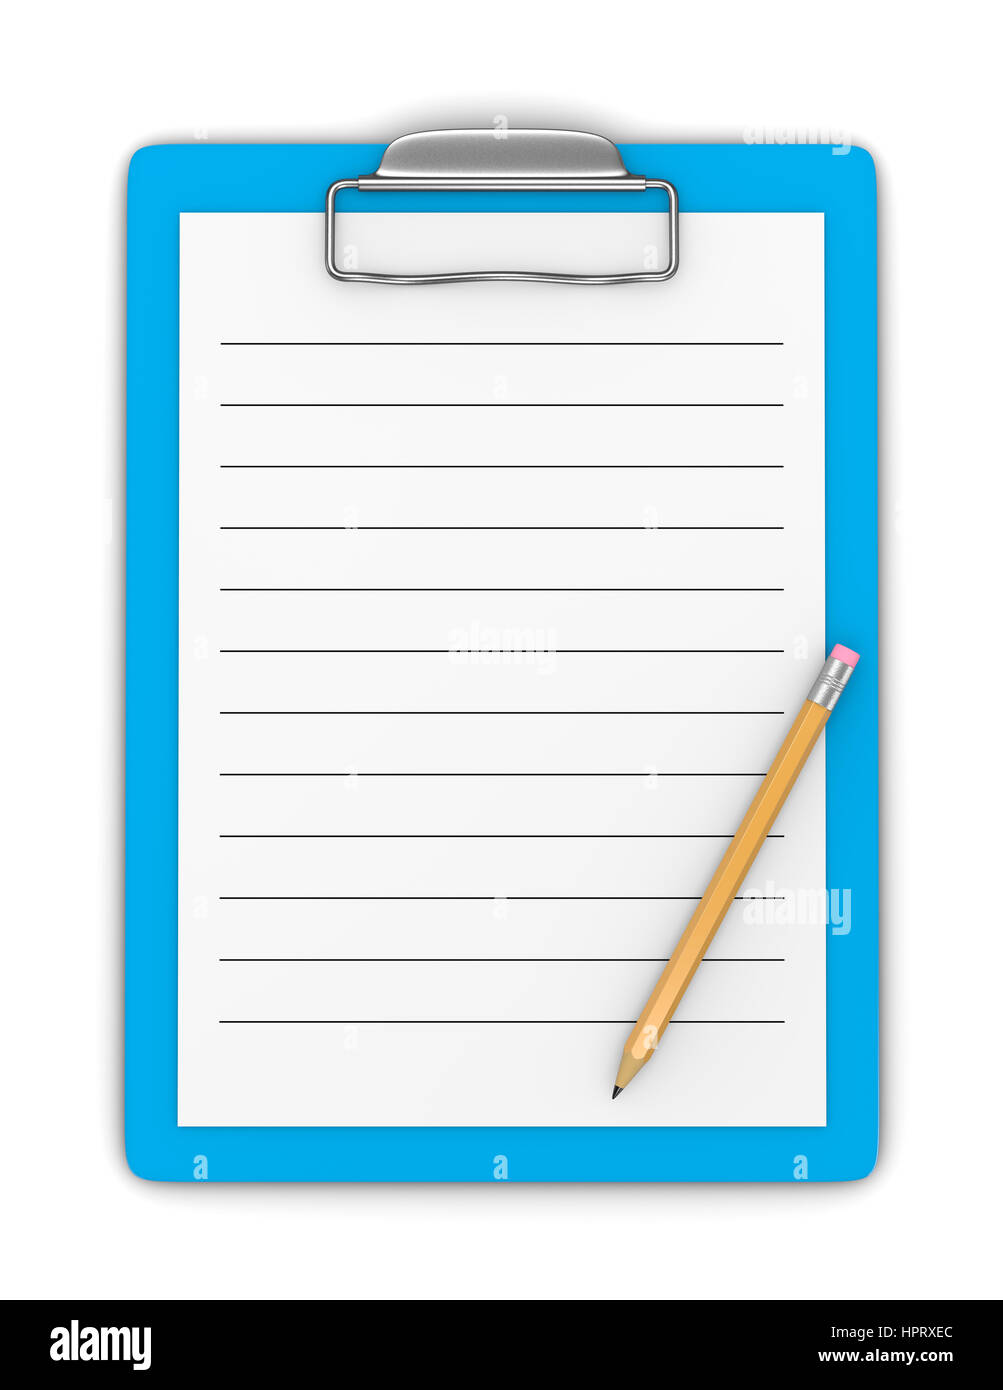 Blue Clipboard with Pencil and Blank Ruled Paper on White Background 3D Illustration Stock Photo